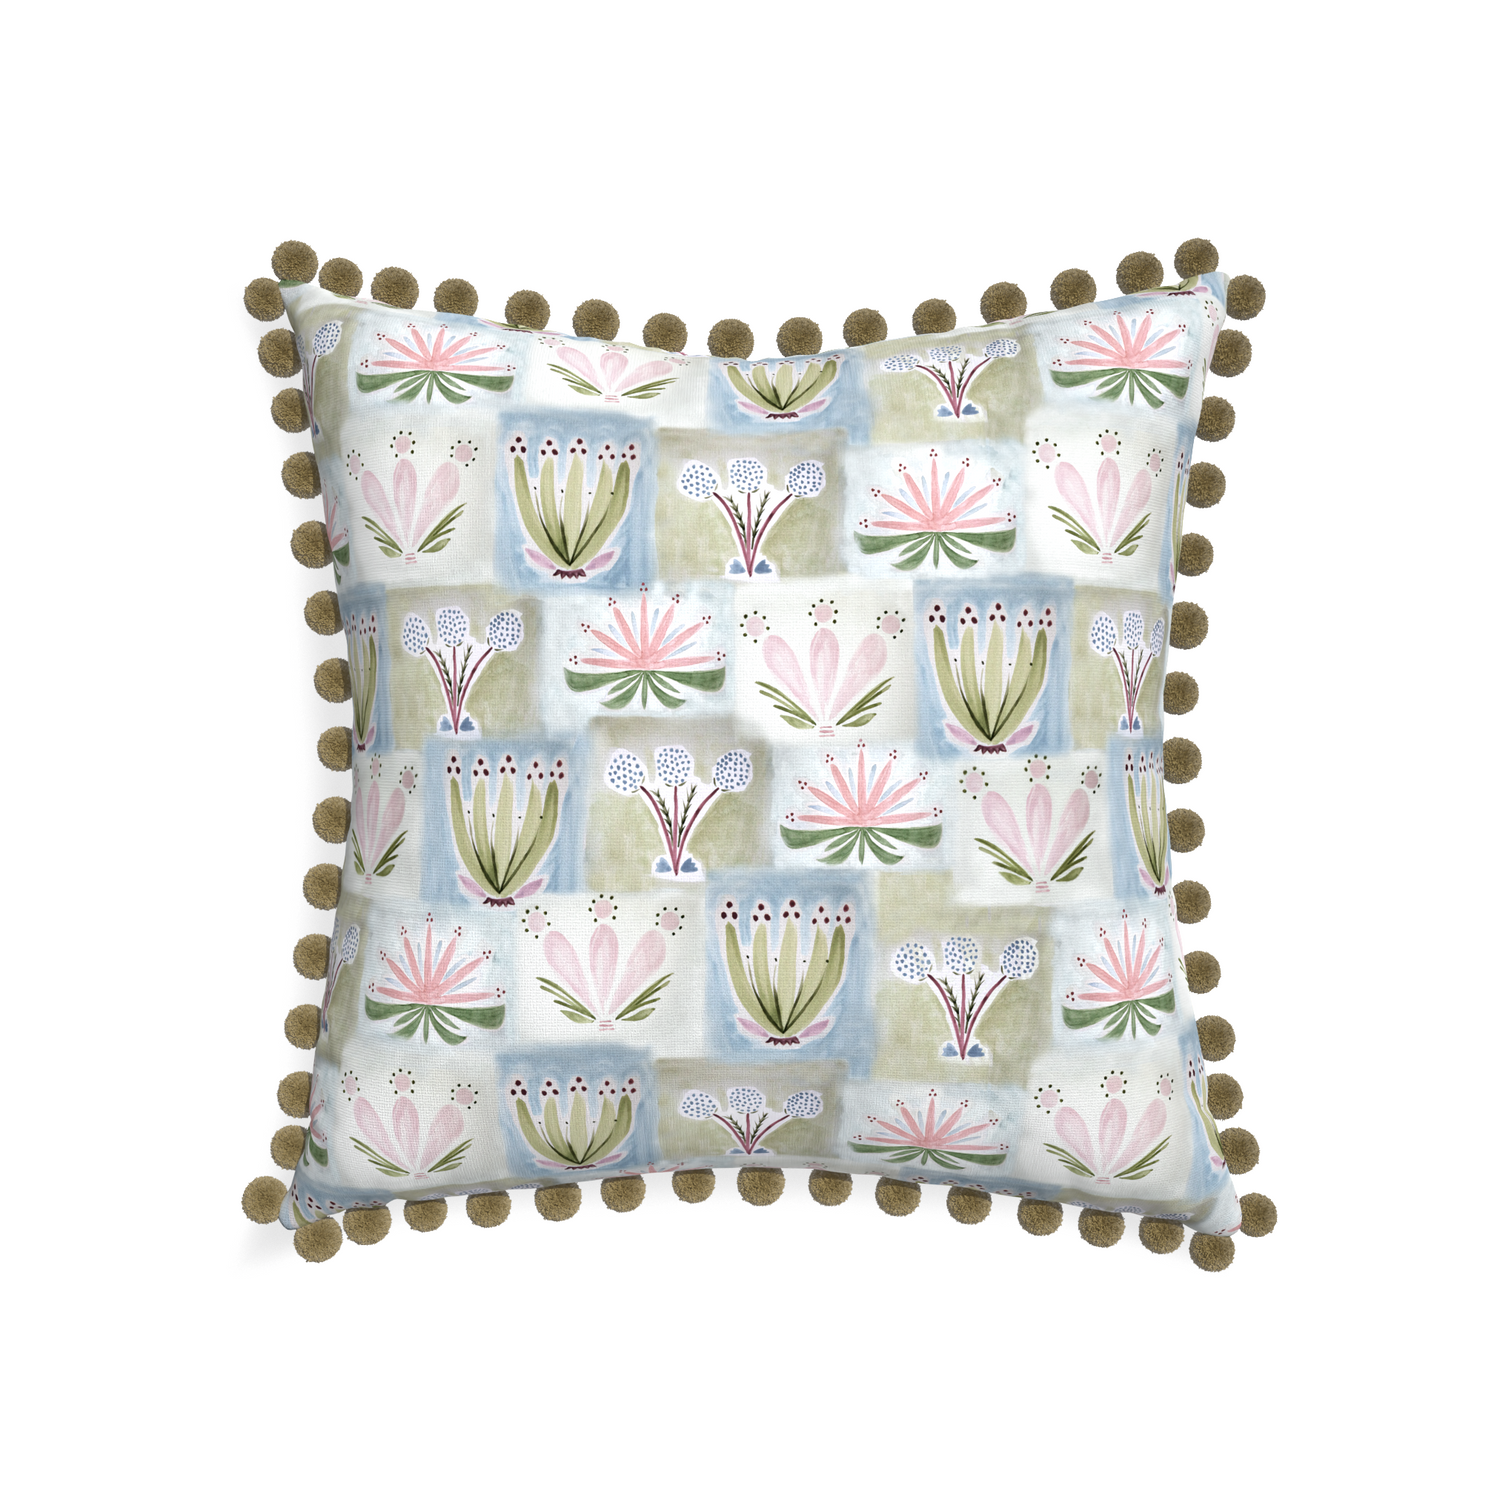 22-square harper custom hand-painted floralpillow with olive pom pom on white background